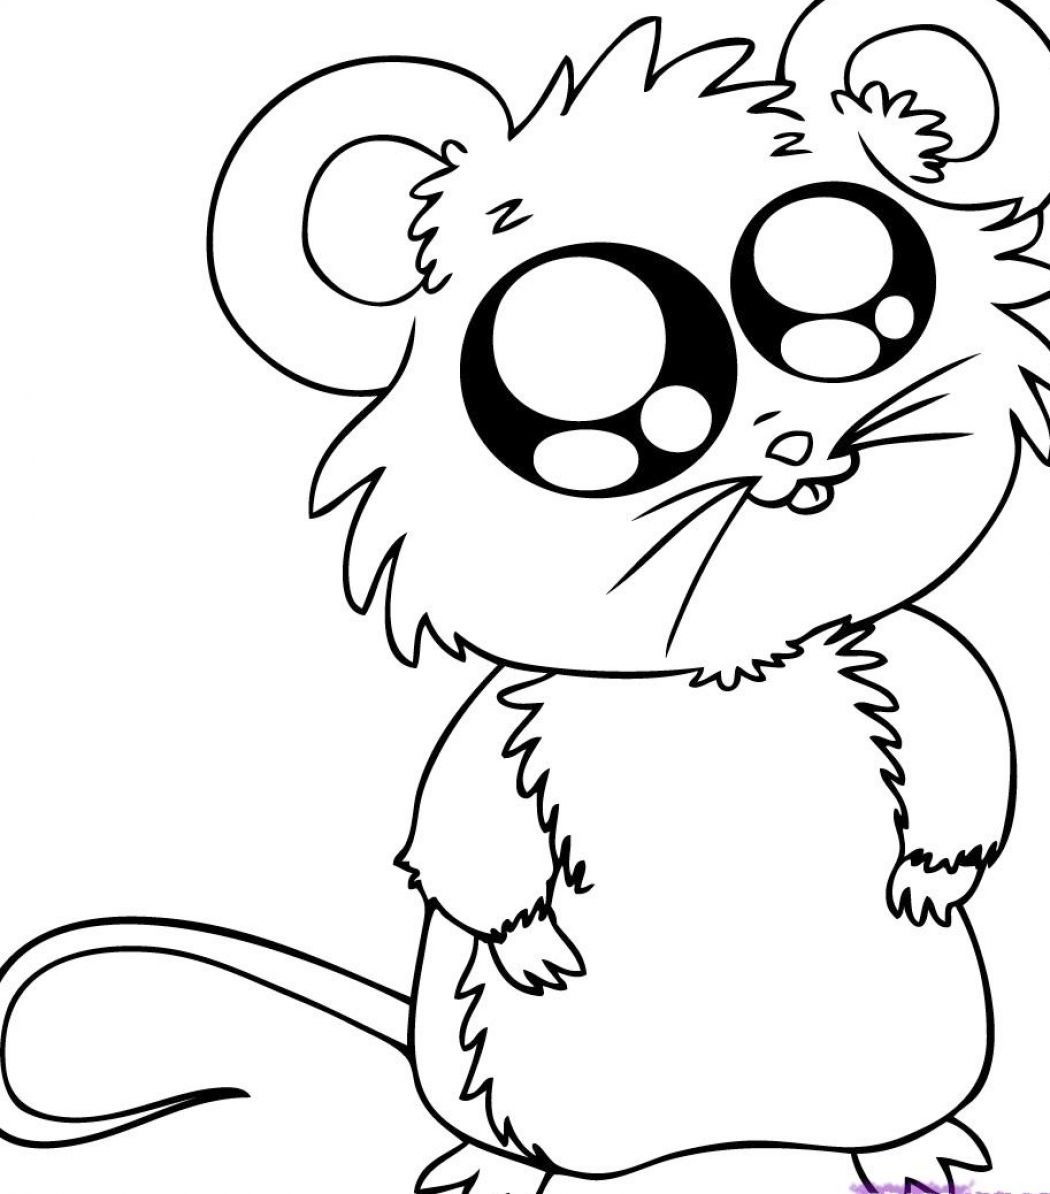 Cute Anime Animals Coloring Pages - Coloring Home